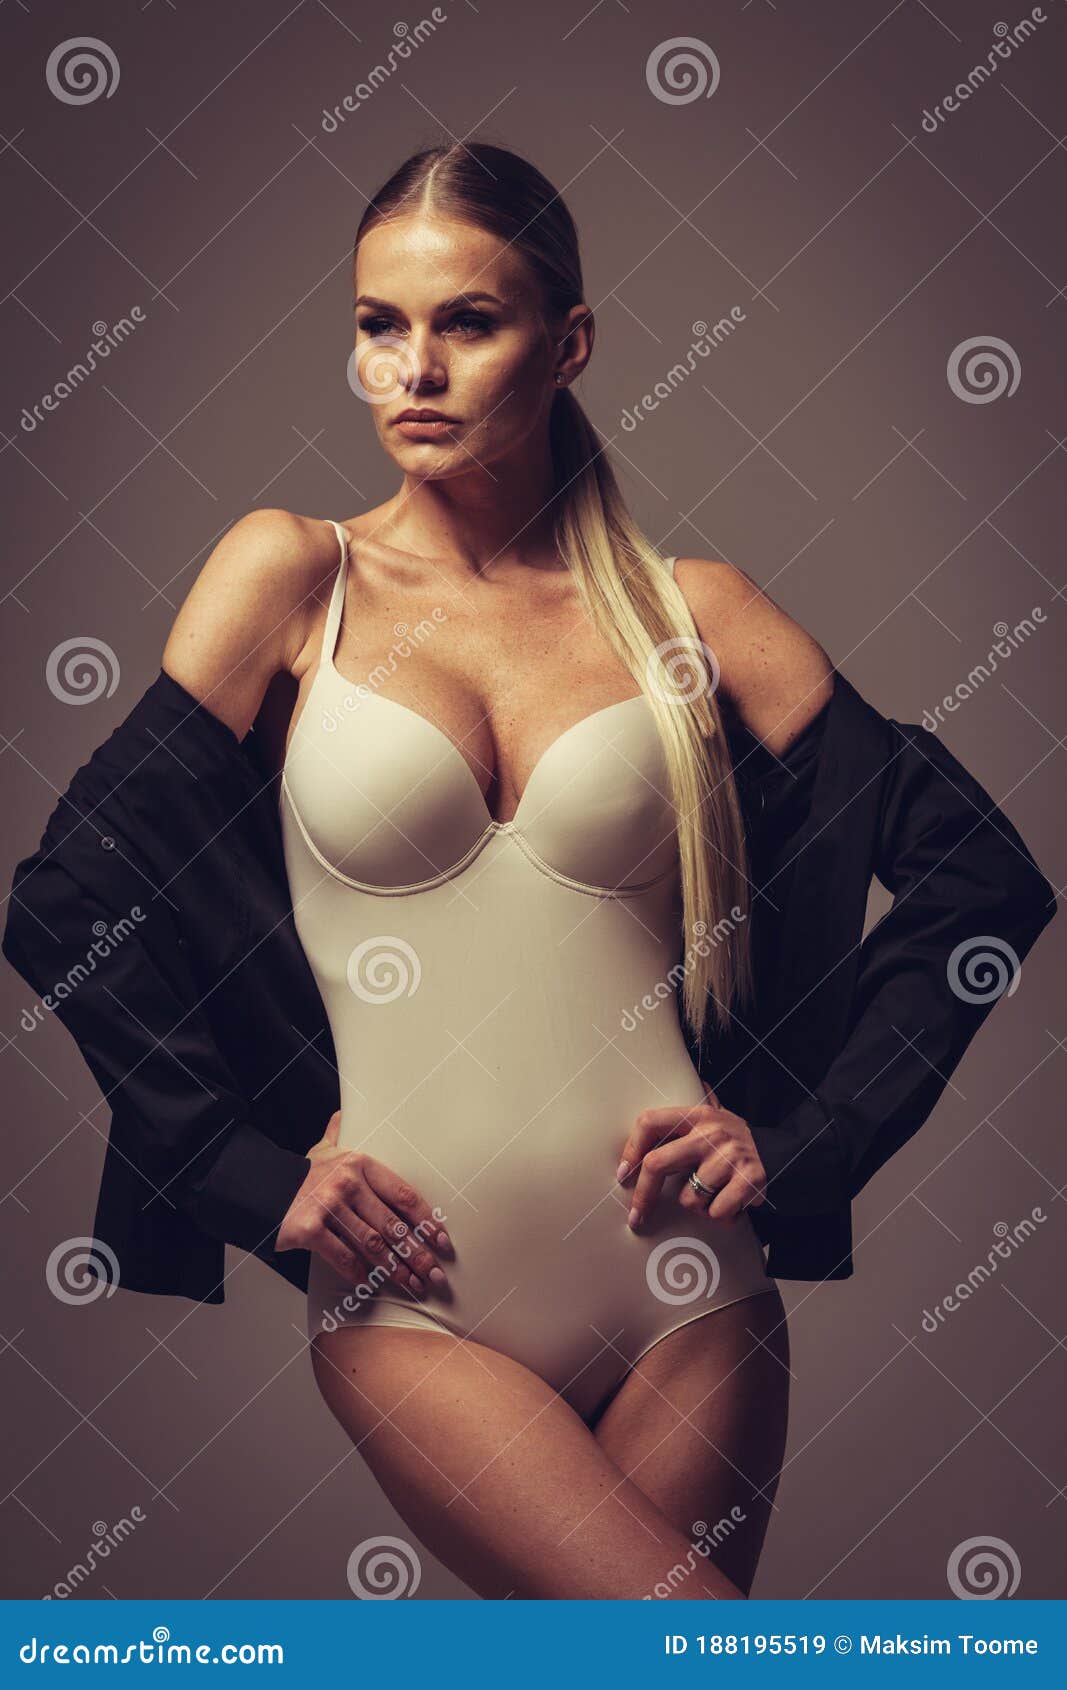 Fashion and Lingerie Concept - Beautiful Blond Lady Portrait in Nude Color Corset and Black Shirt on Gray Stock Image picture